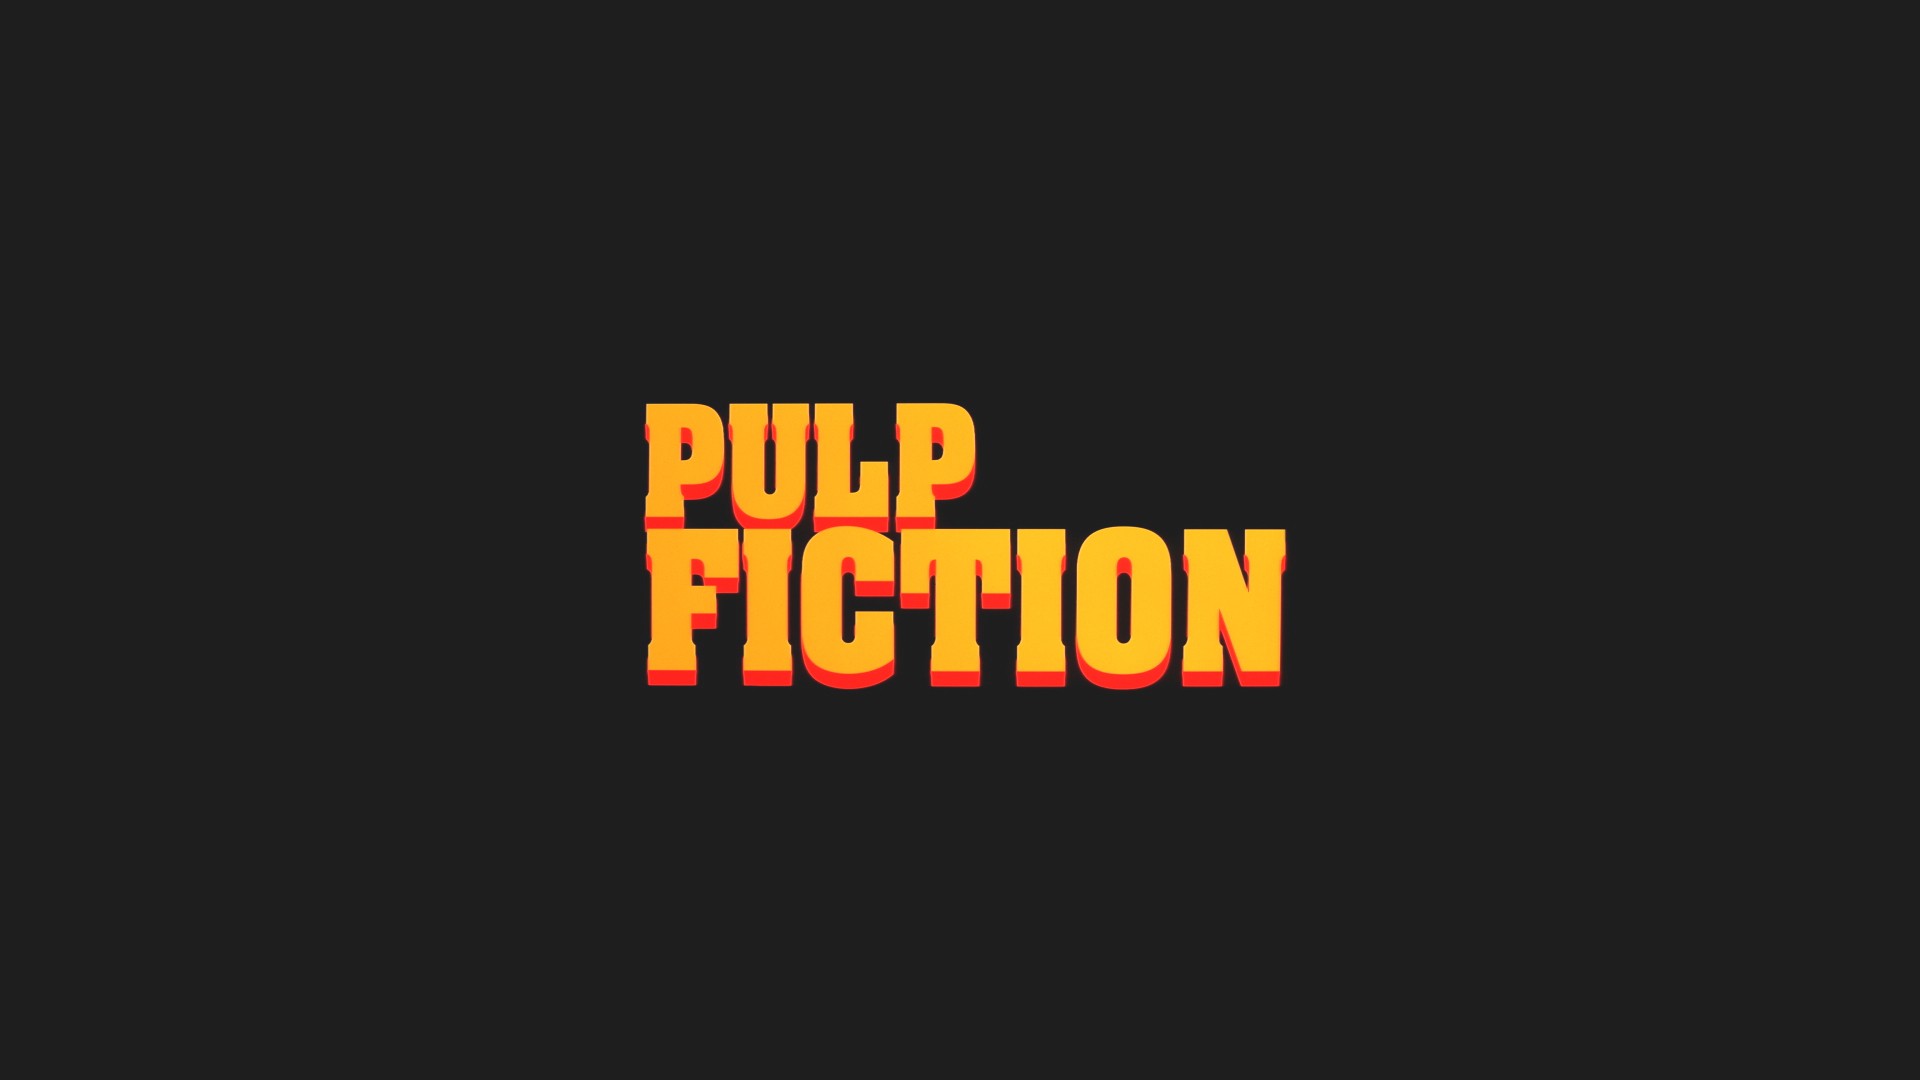 General 1920x1080 Pulp Fiction Quentin Tarantino title movies black background typography simple background minimalism